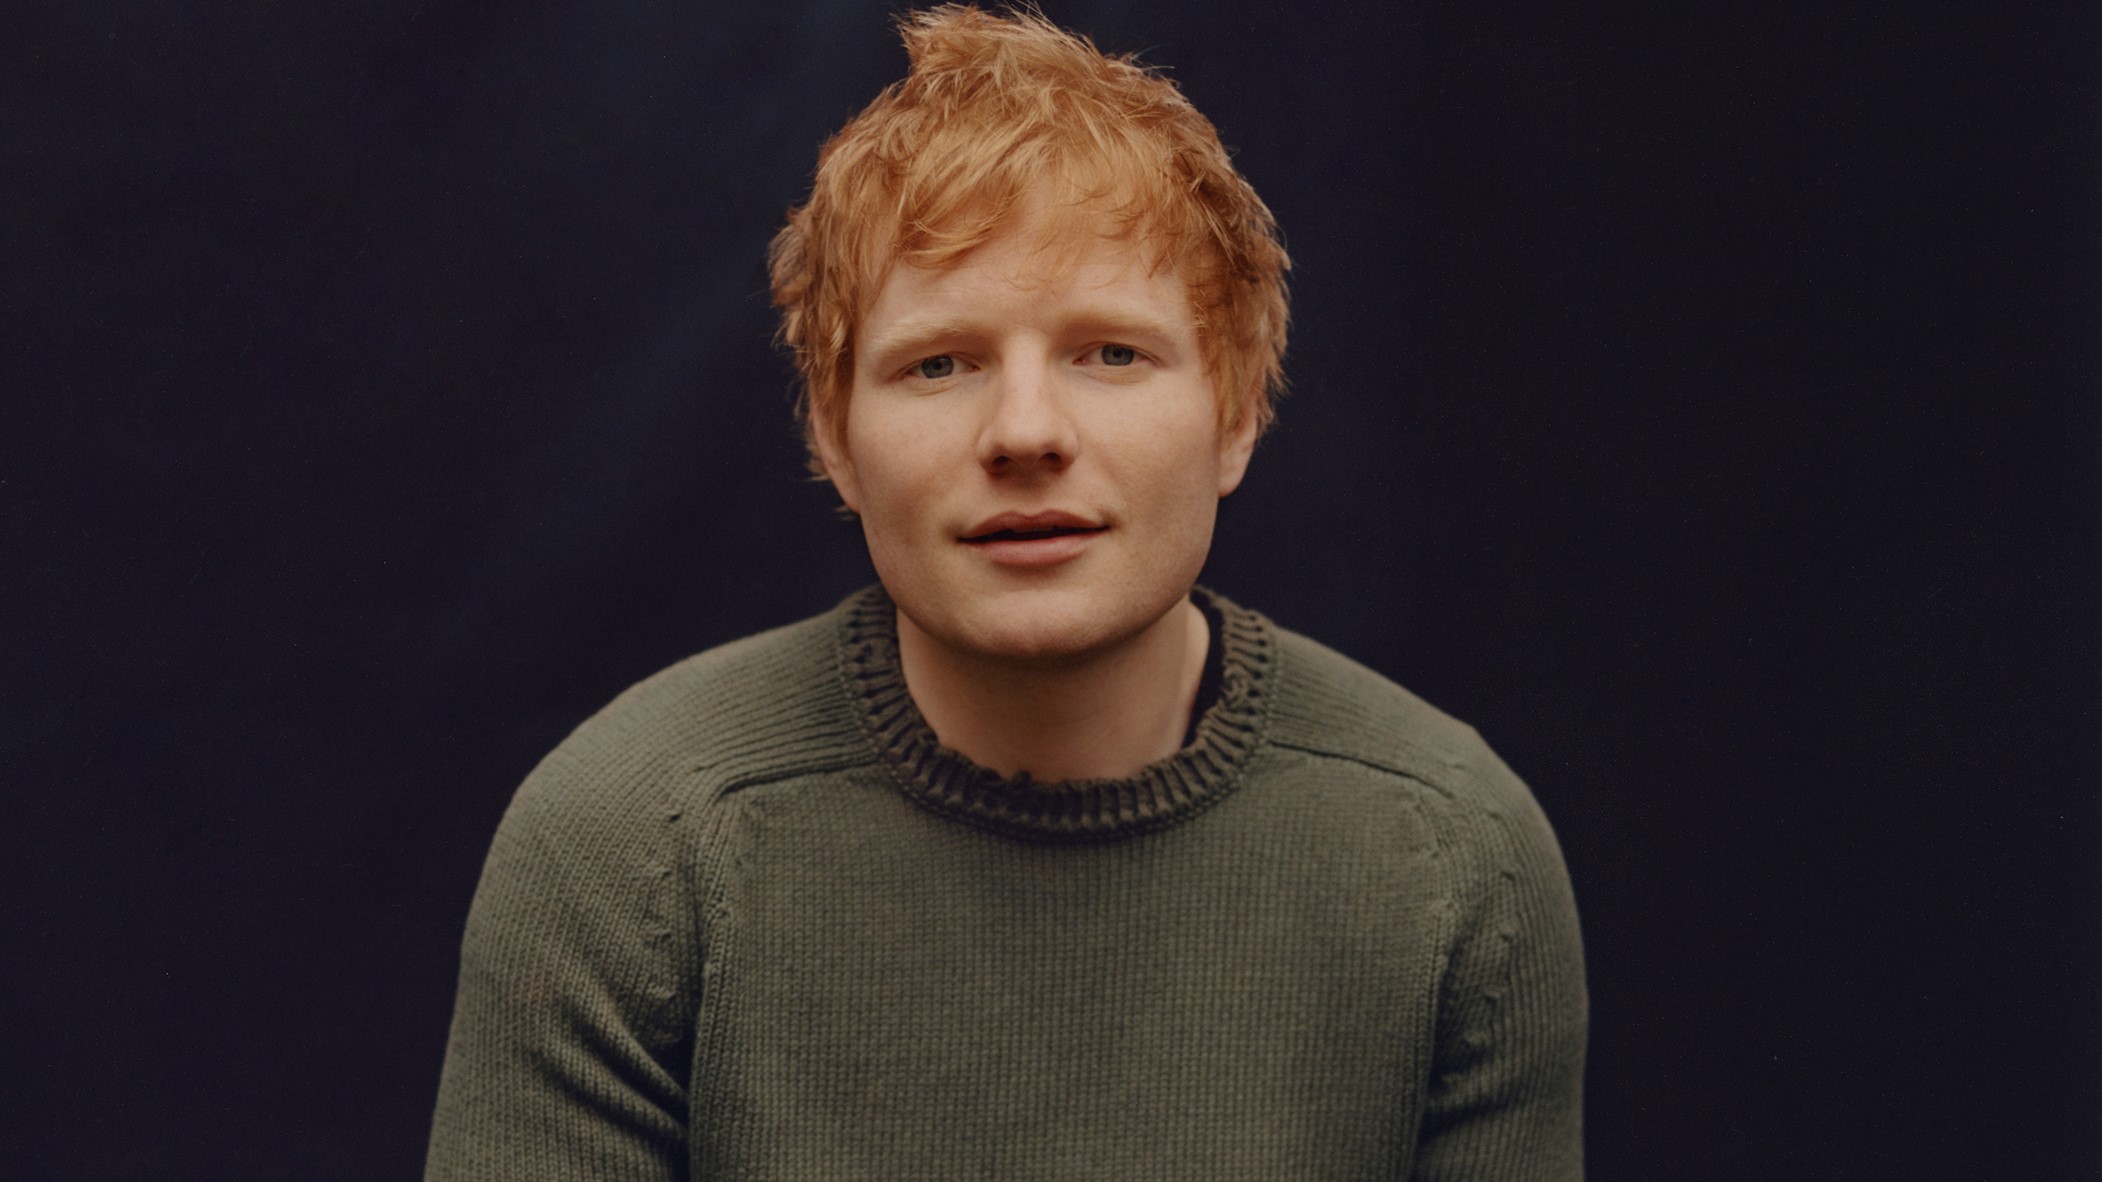 The Career Of Ed Sheeran - The Rise Of A Music Legend